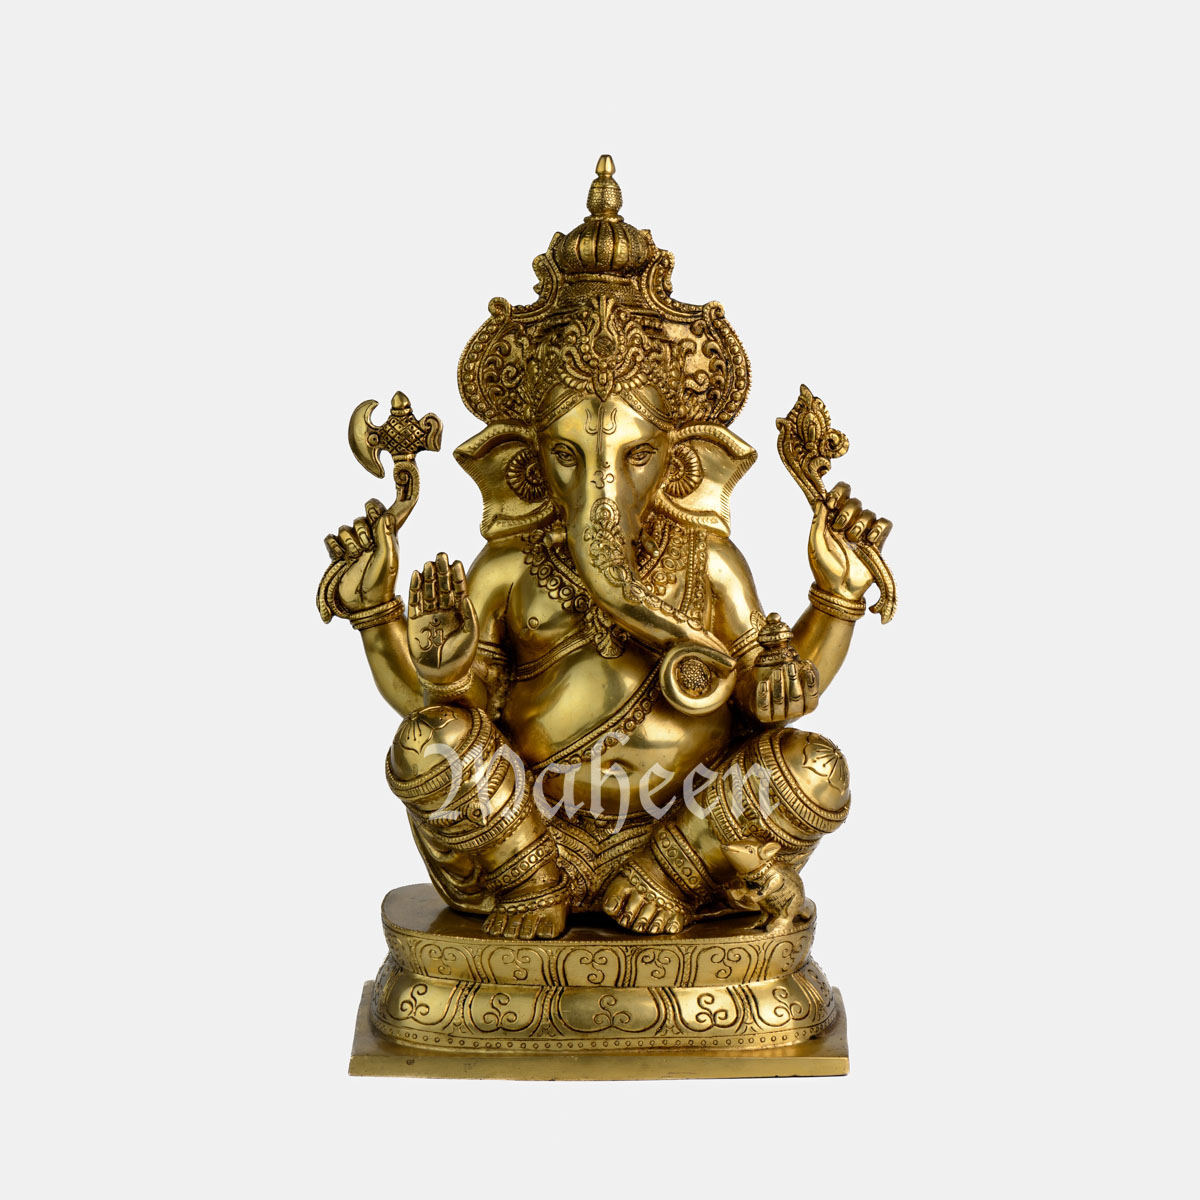 Brass Ganesha – With Ornate Dress & Crown Work, Seated On Oval Base